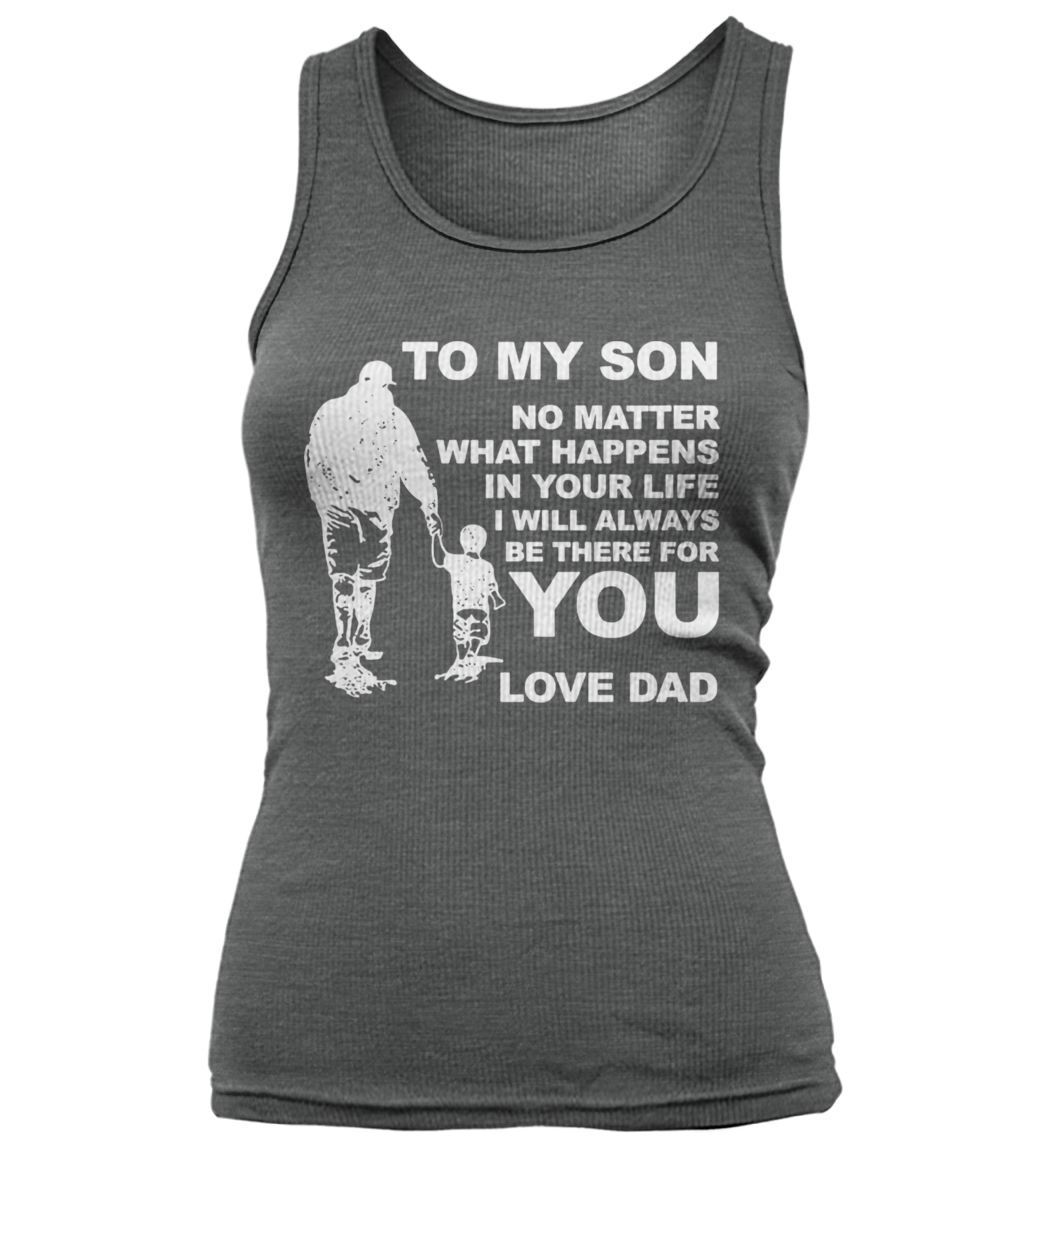 To my son no matter what happens in your life I will always be there for you love dad women's tank top